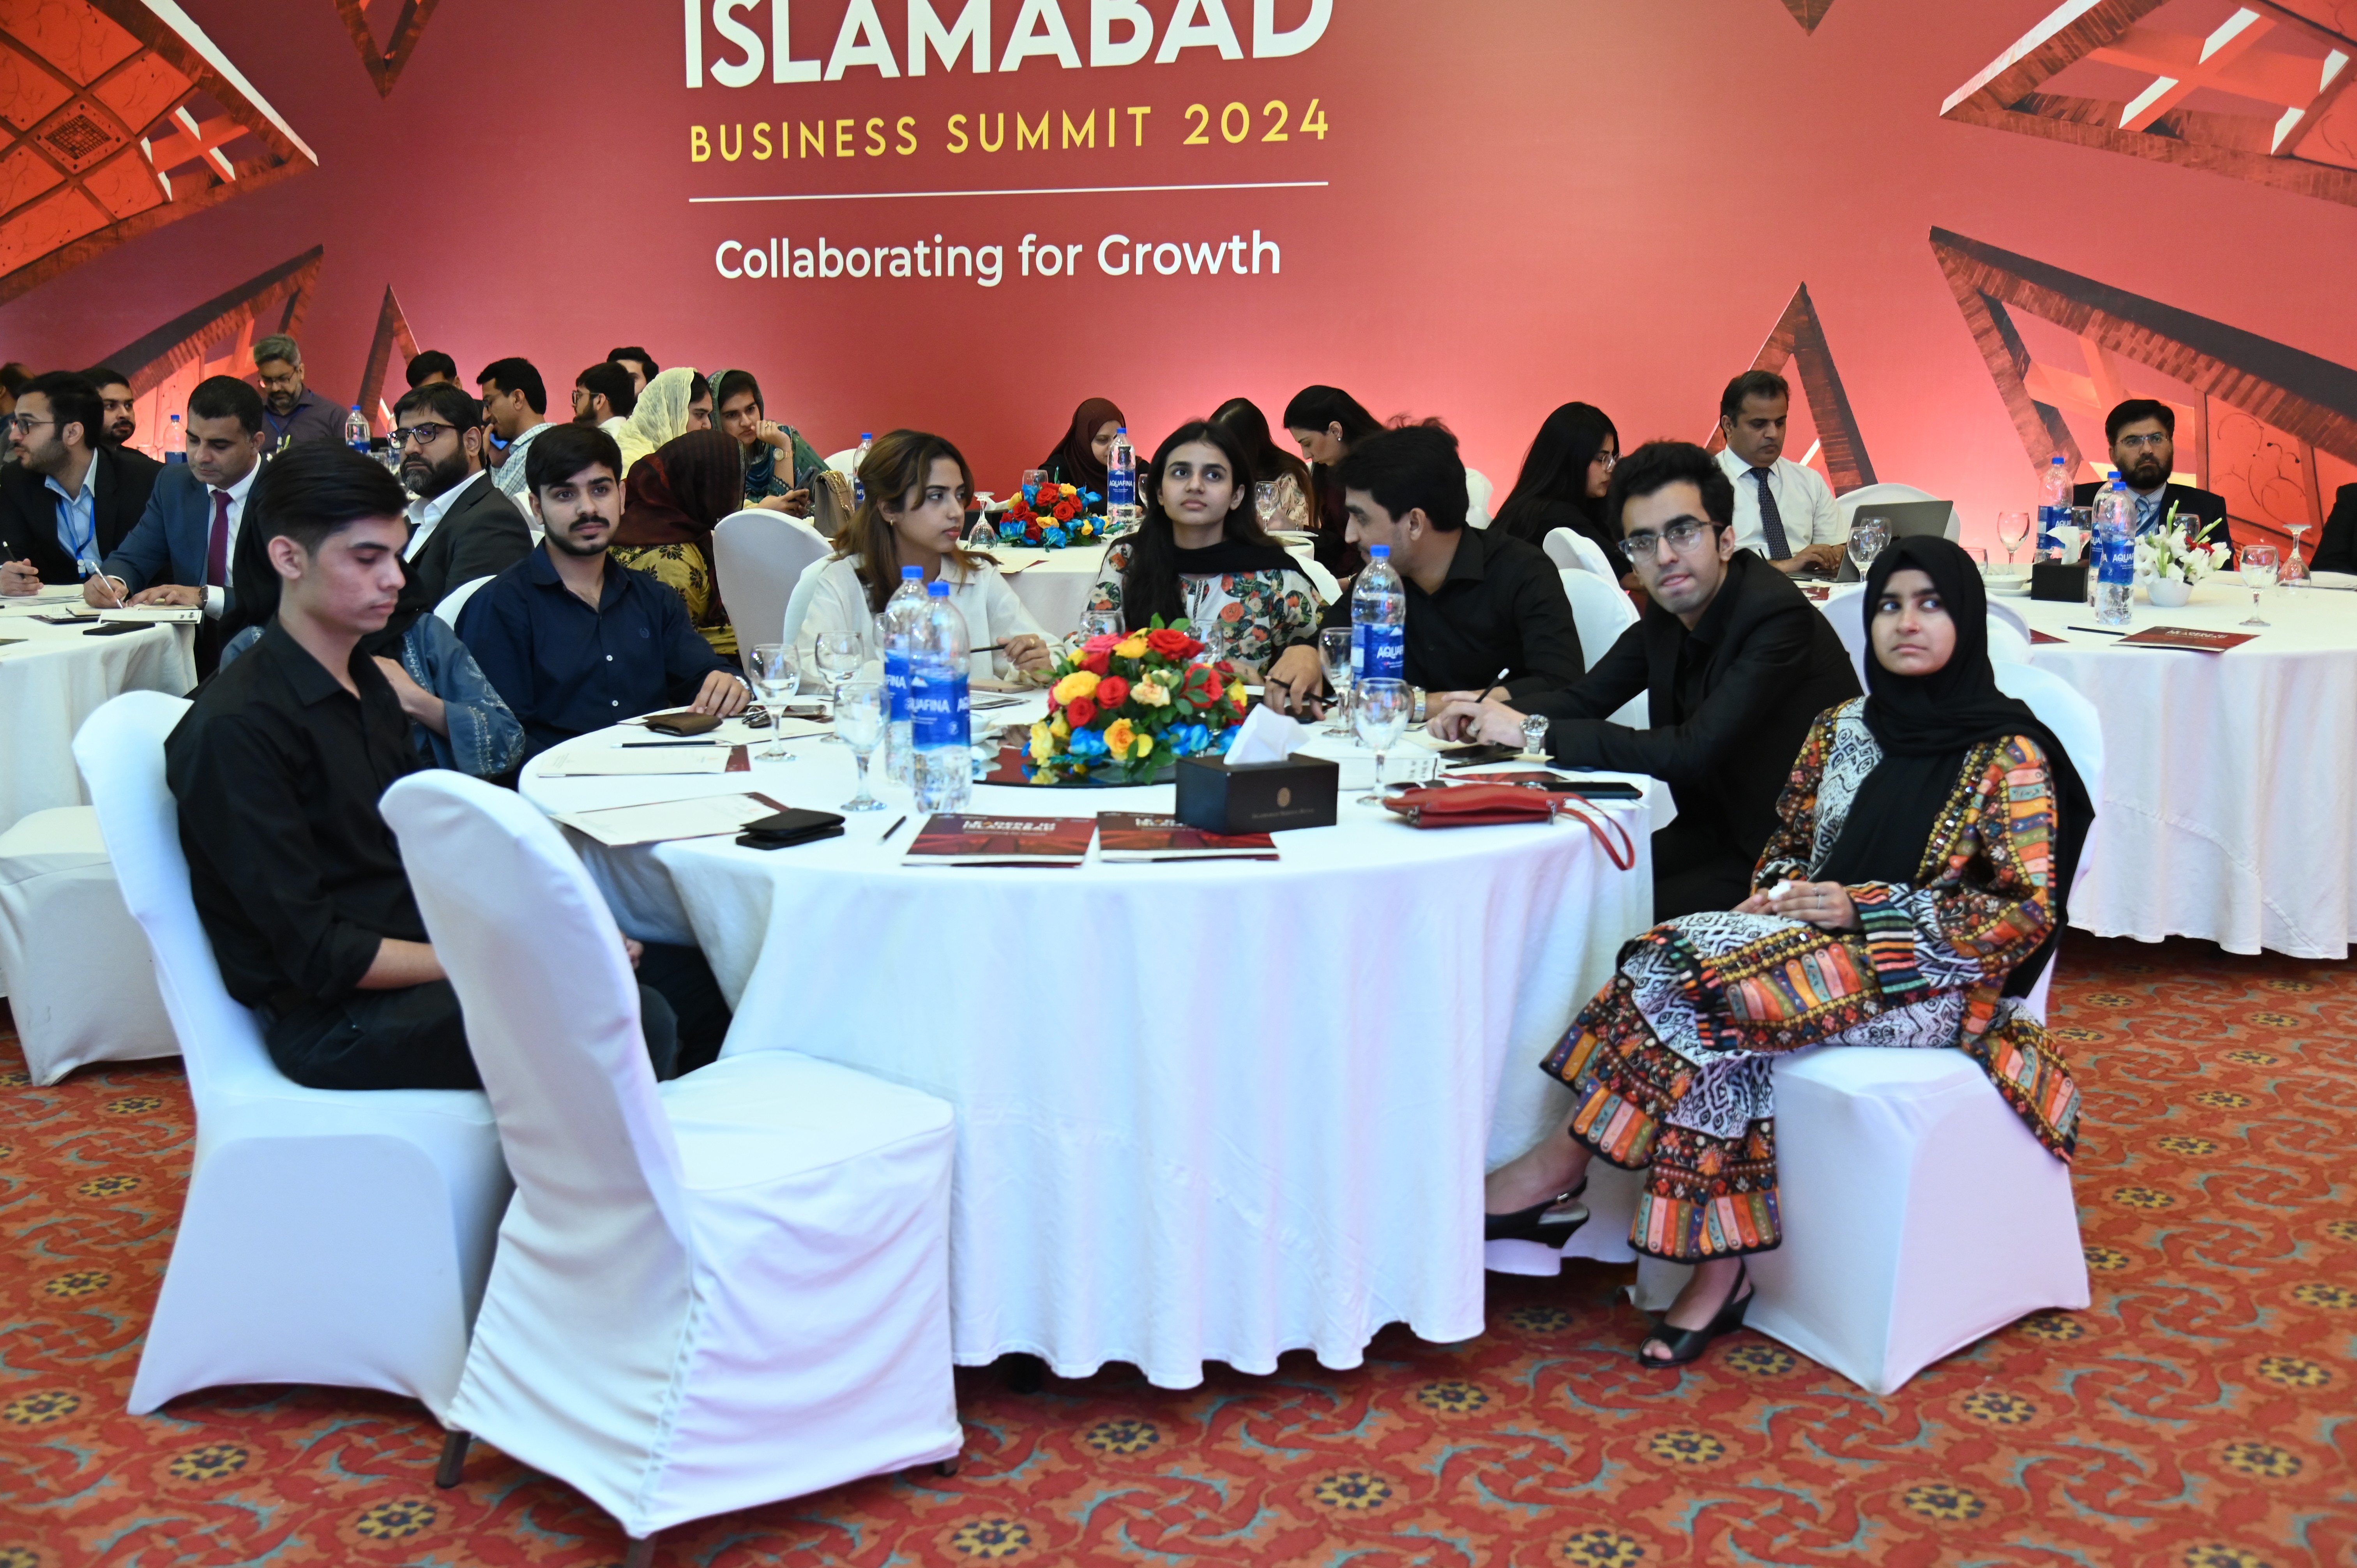 The students attending the 7th edition of Pakistan's Biggest corporate event, Leaders in Islamabad